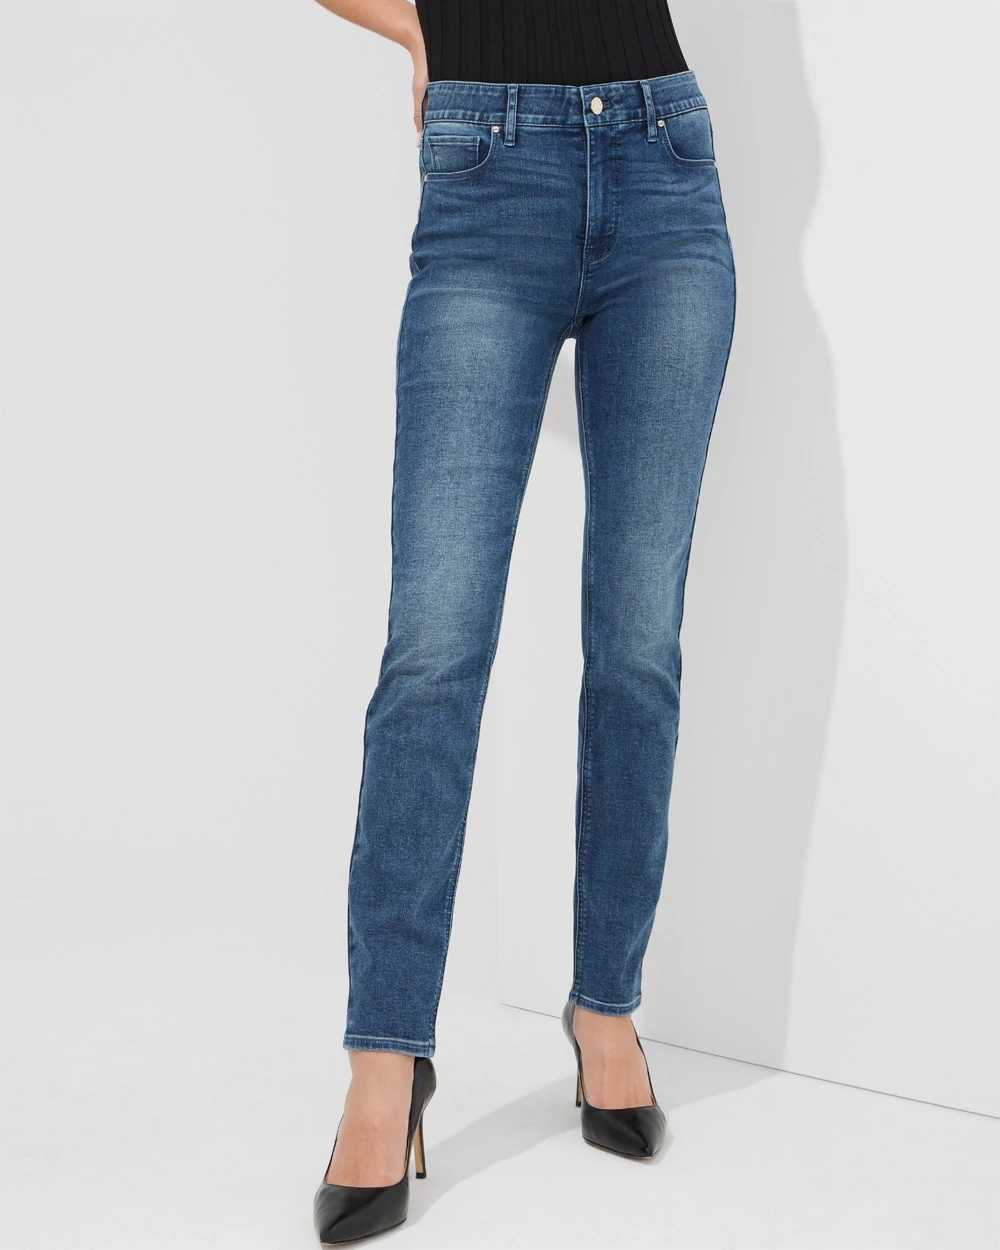 Outlet WHBM High-Rise Slim Jeans click to view larger image.